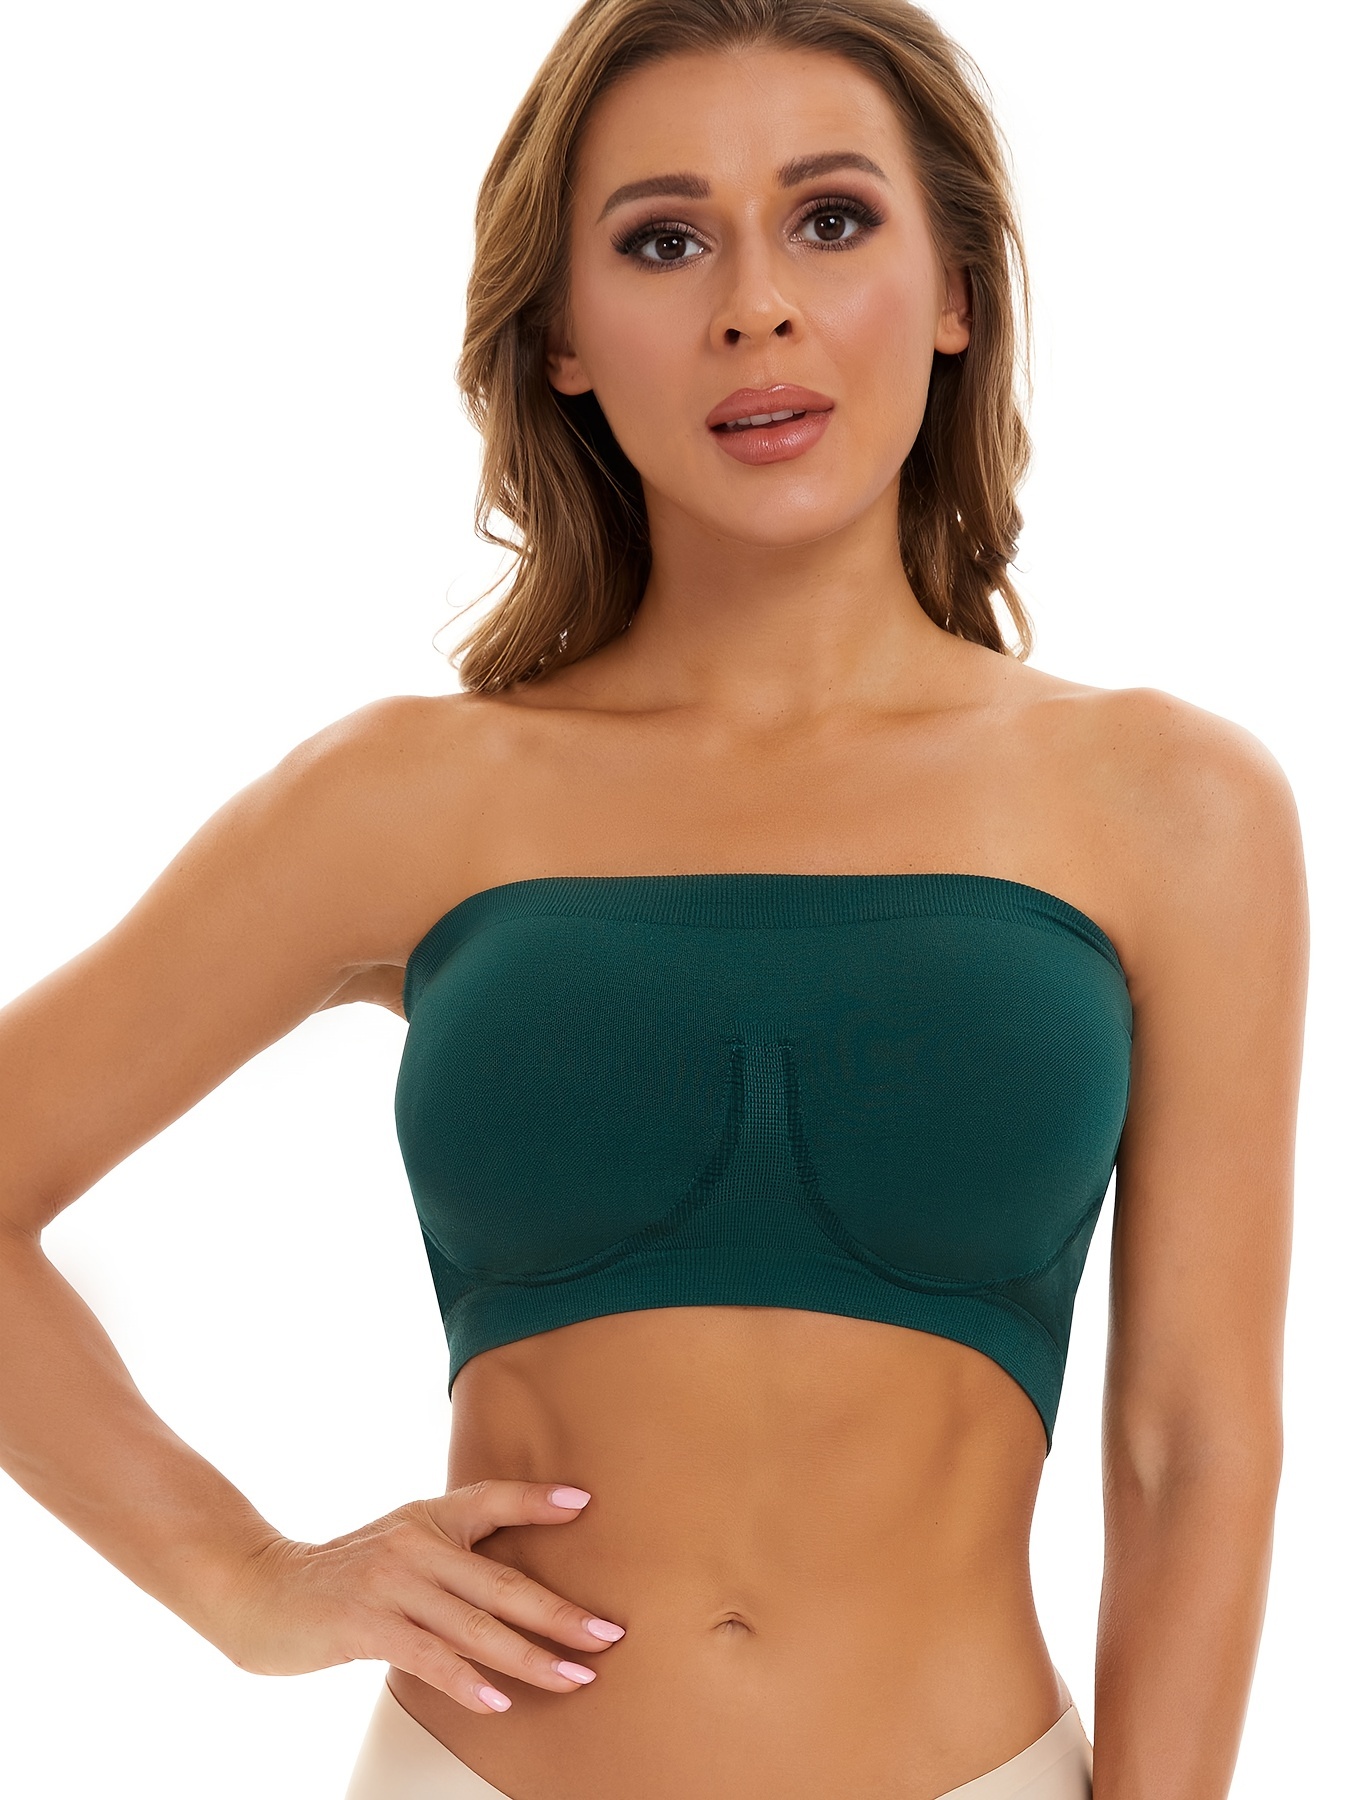 Bandeau Bra Women's Seamless MID Solid Color Sports Bra with